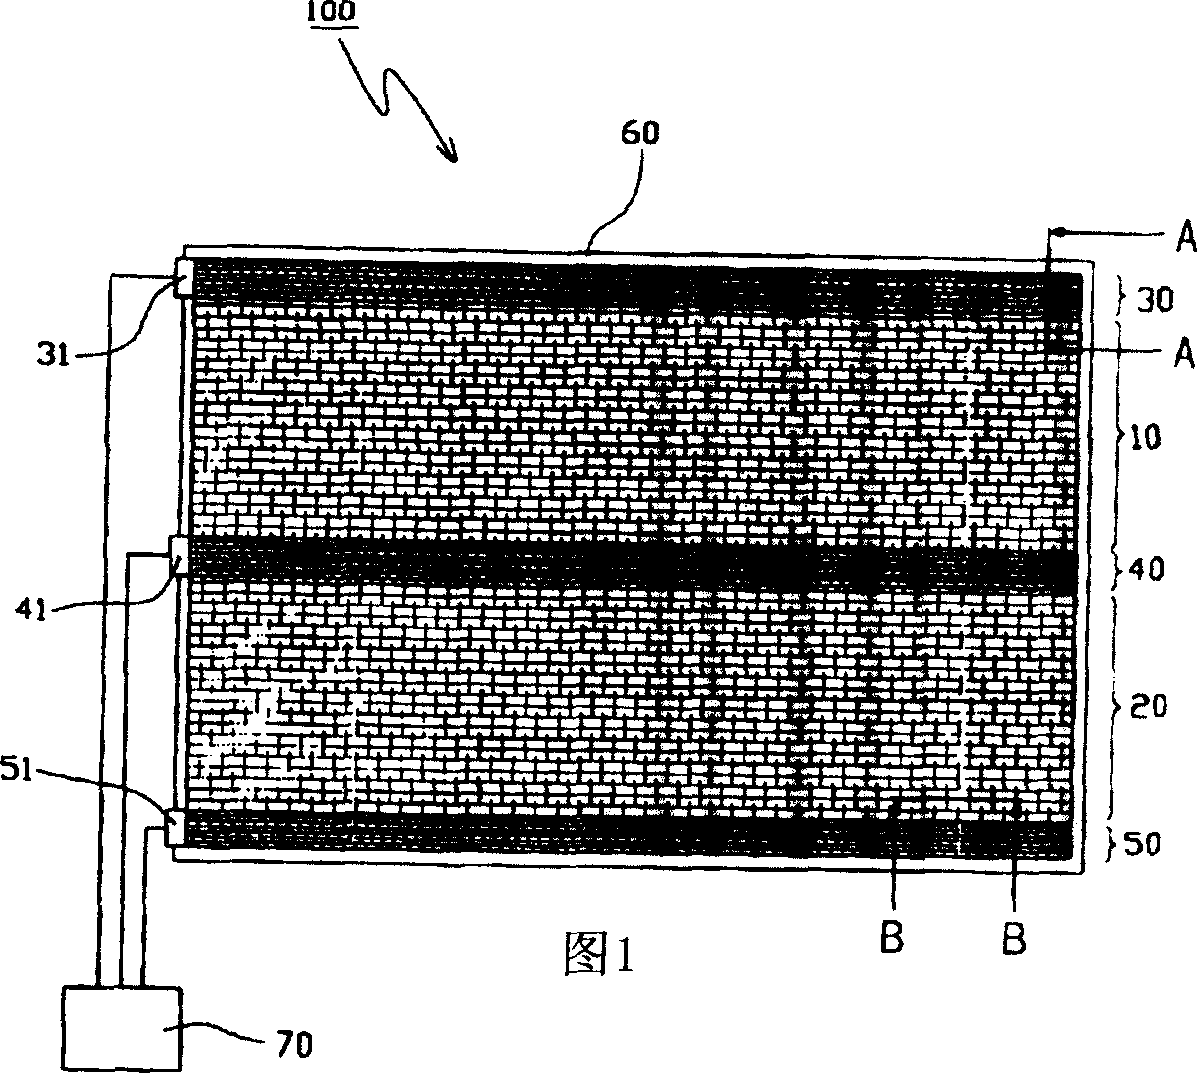 Fiber reinforced heating unit and mattress with thereof